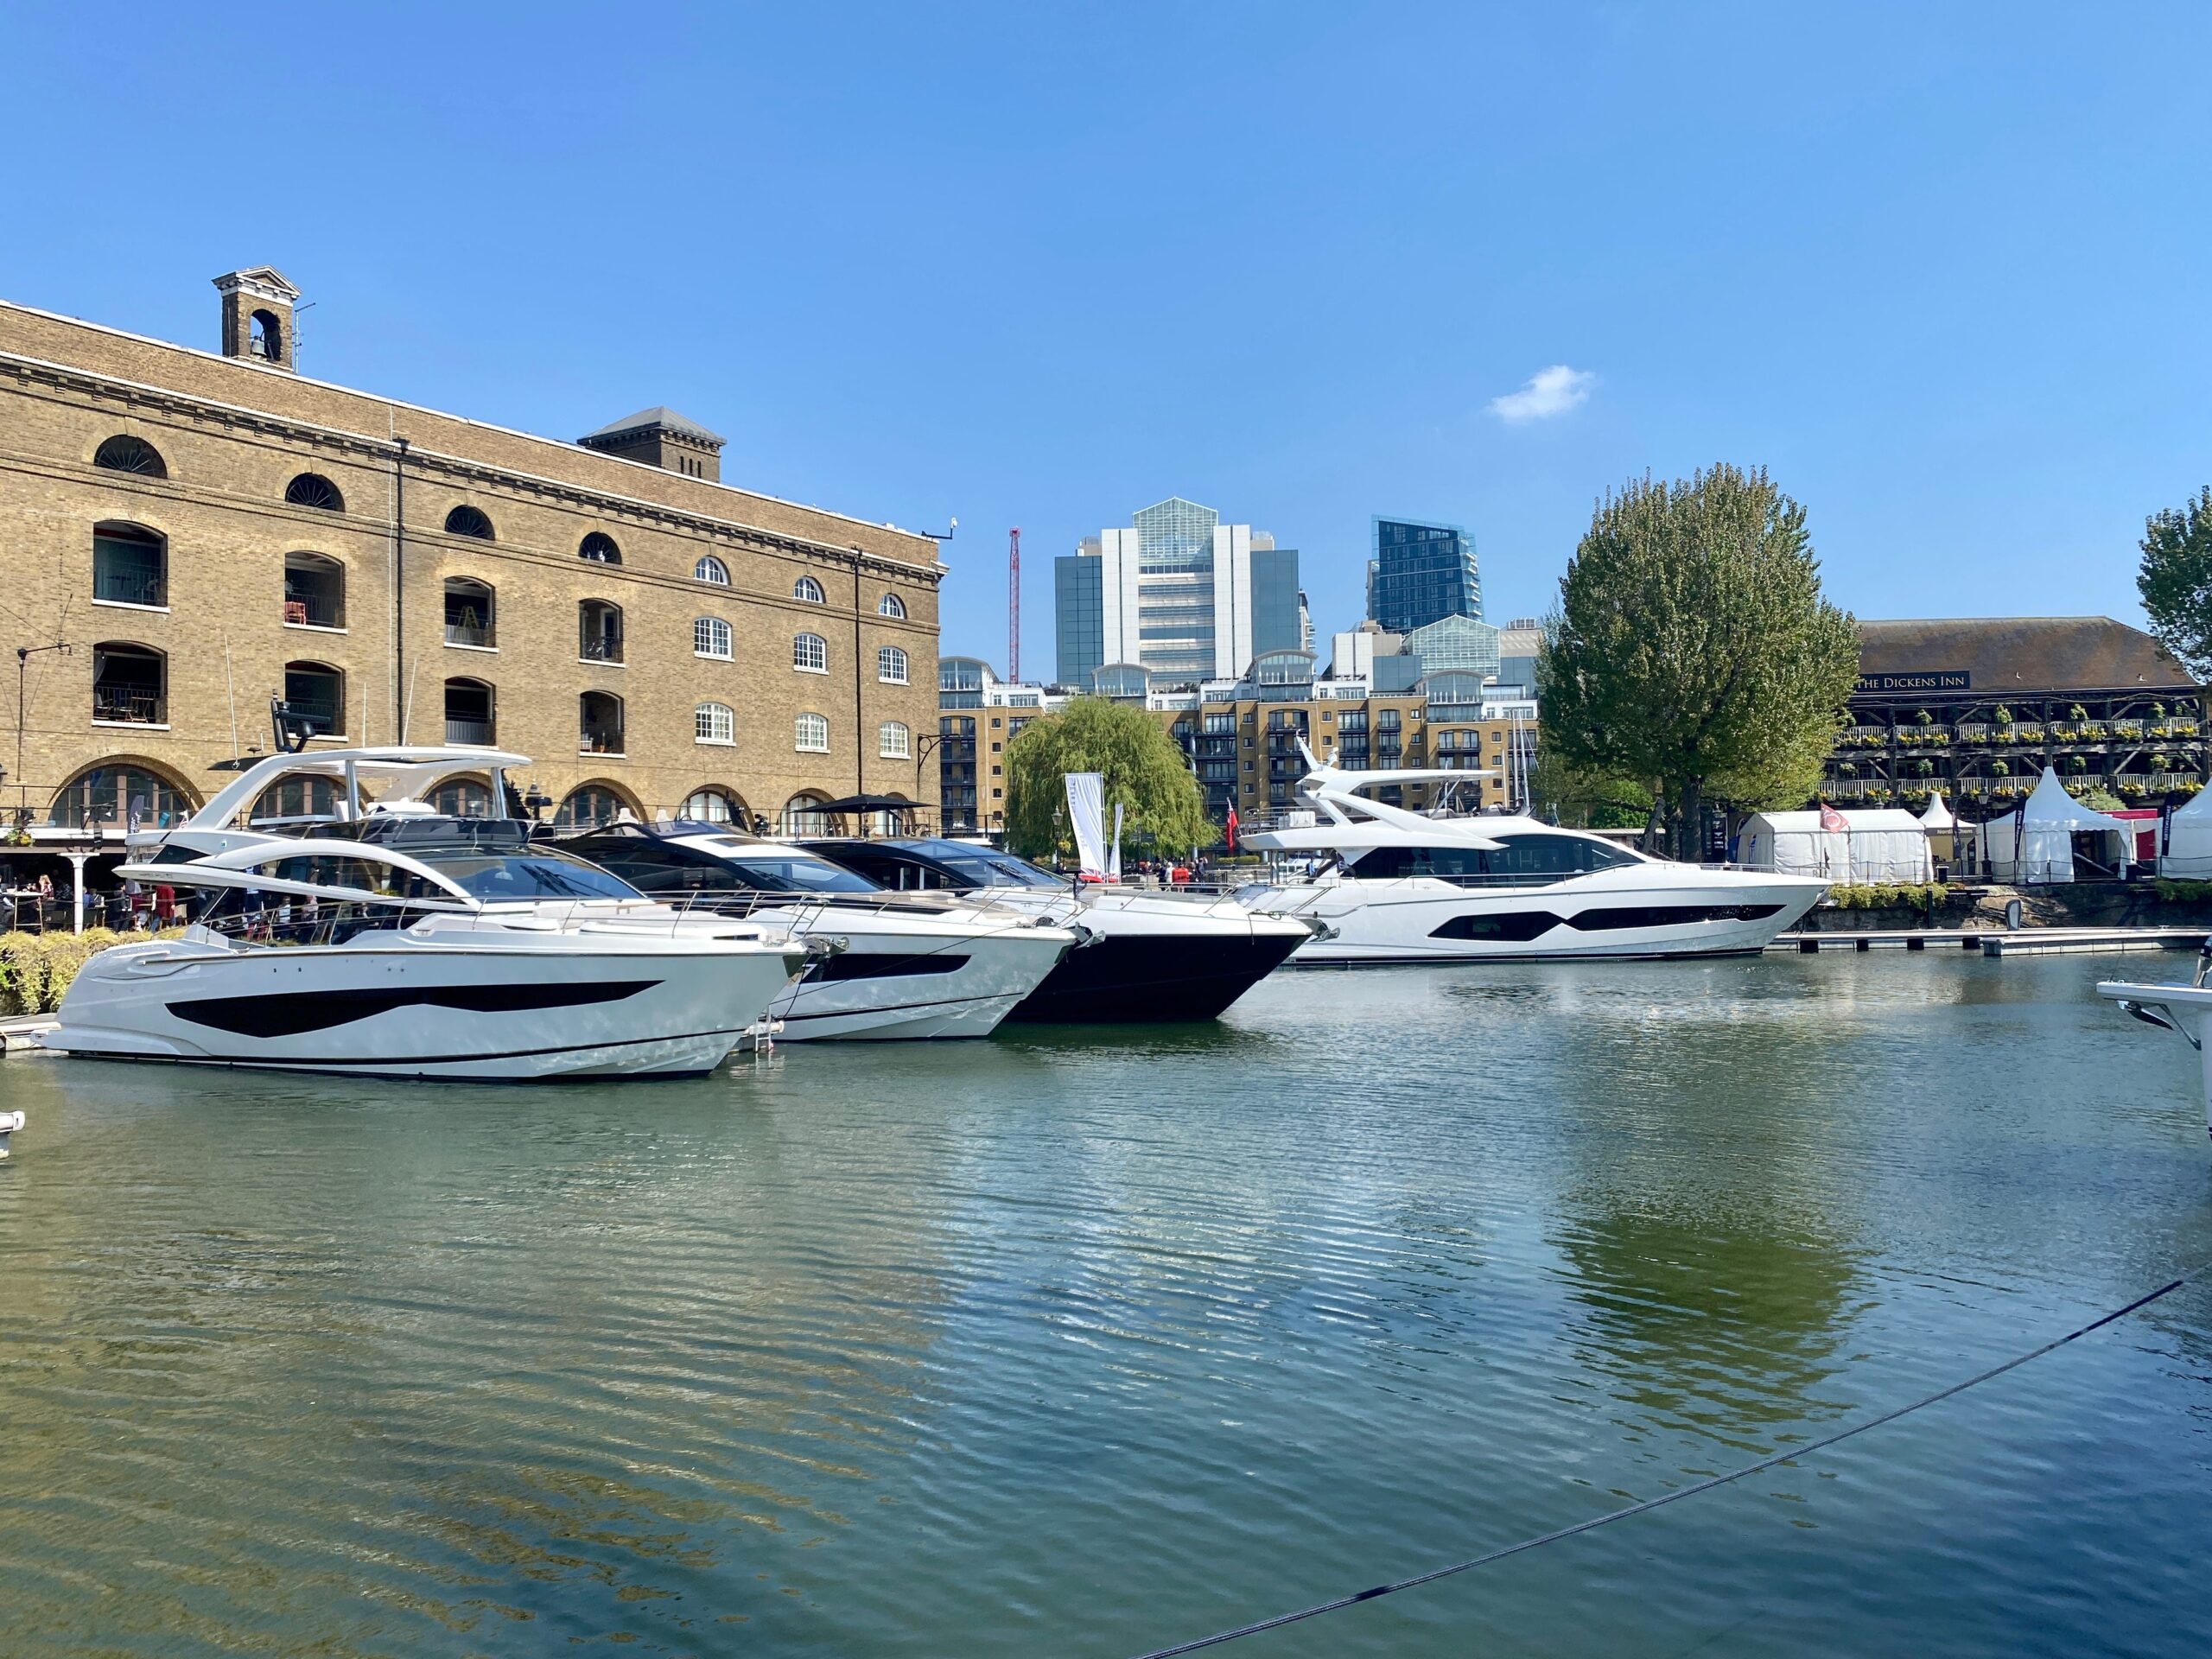 The yachts were lined up at St. Katharine&#39;s Dock, London.